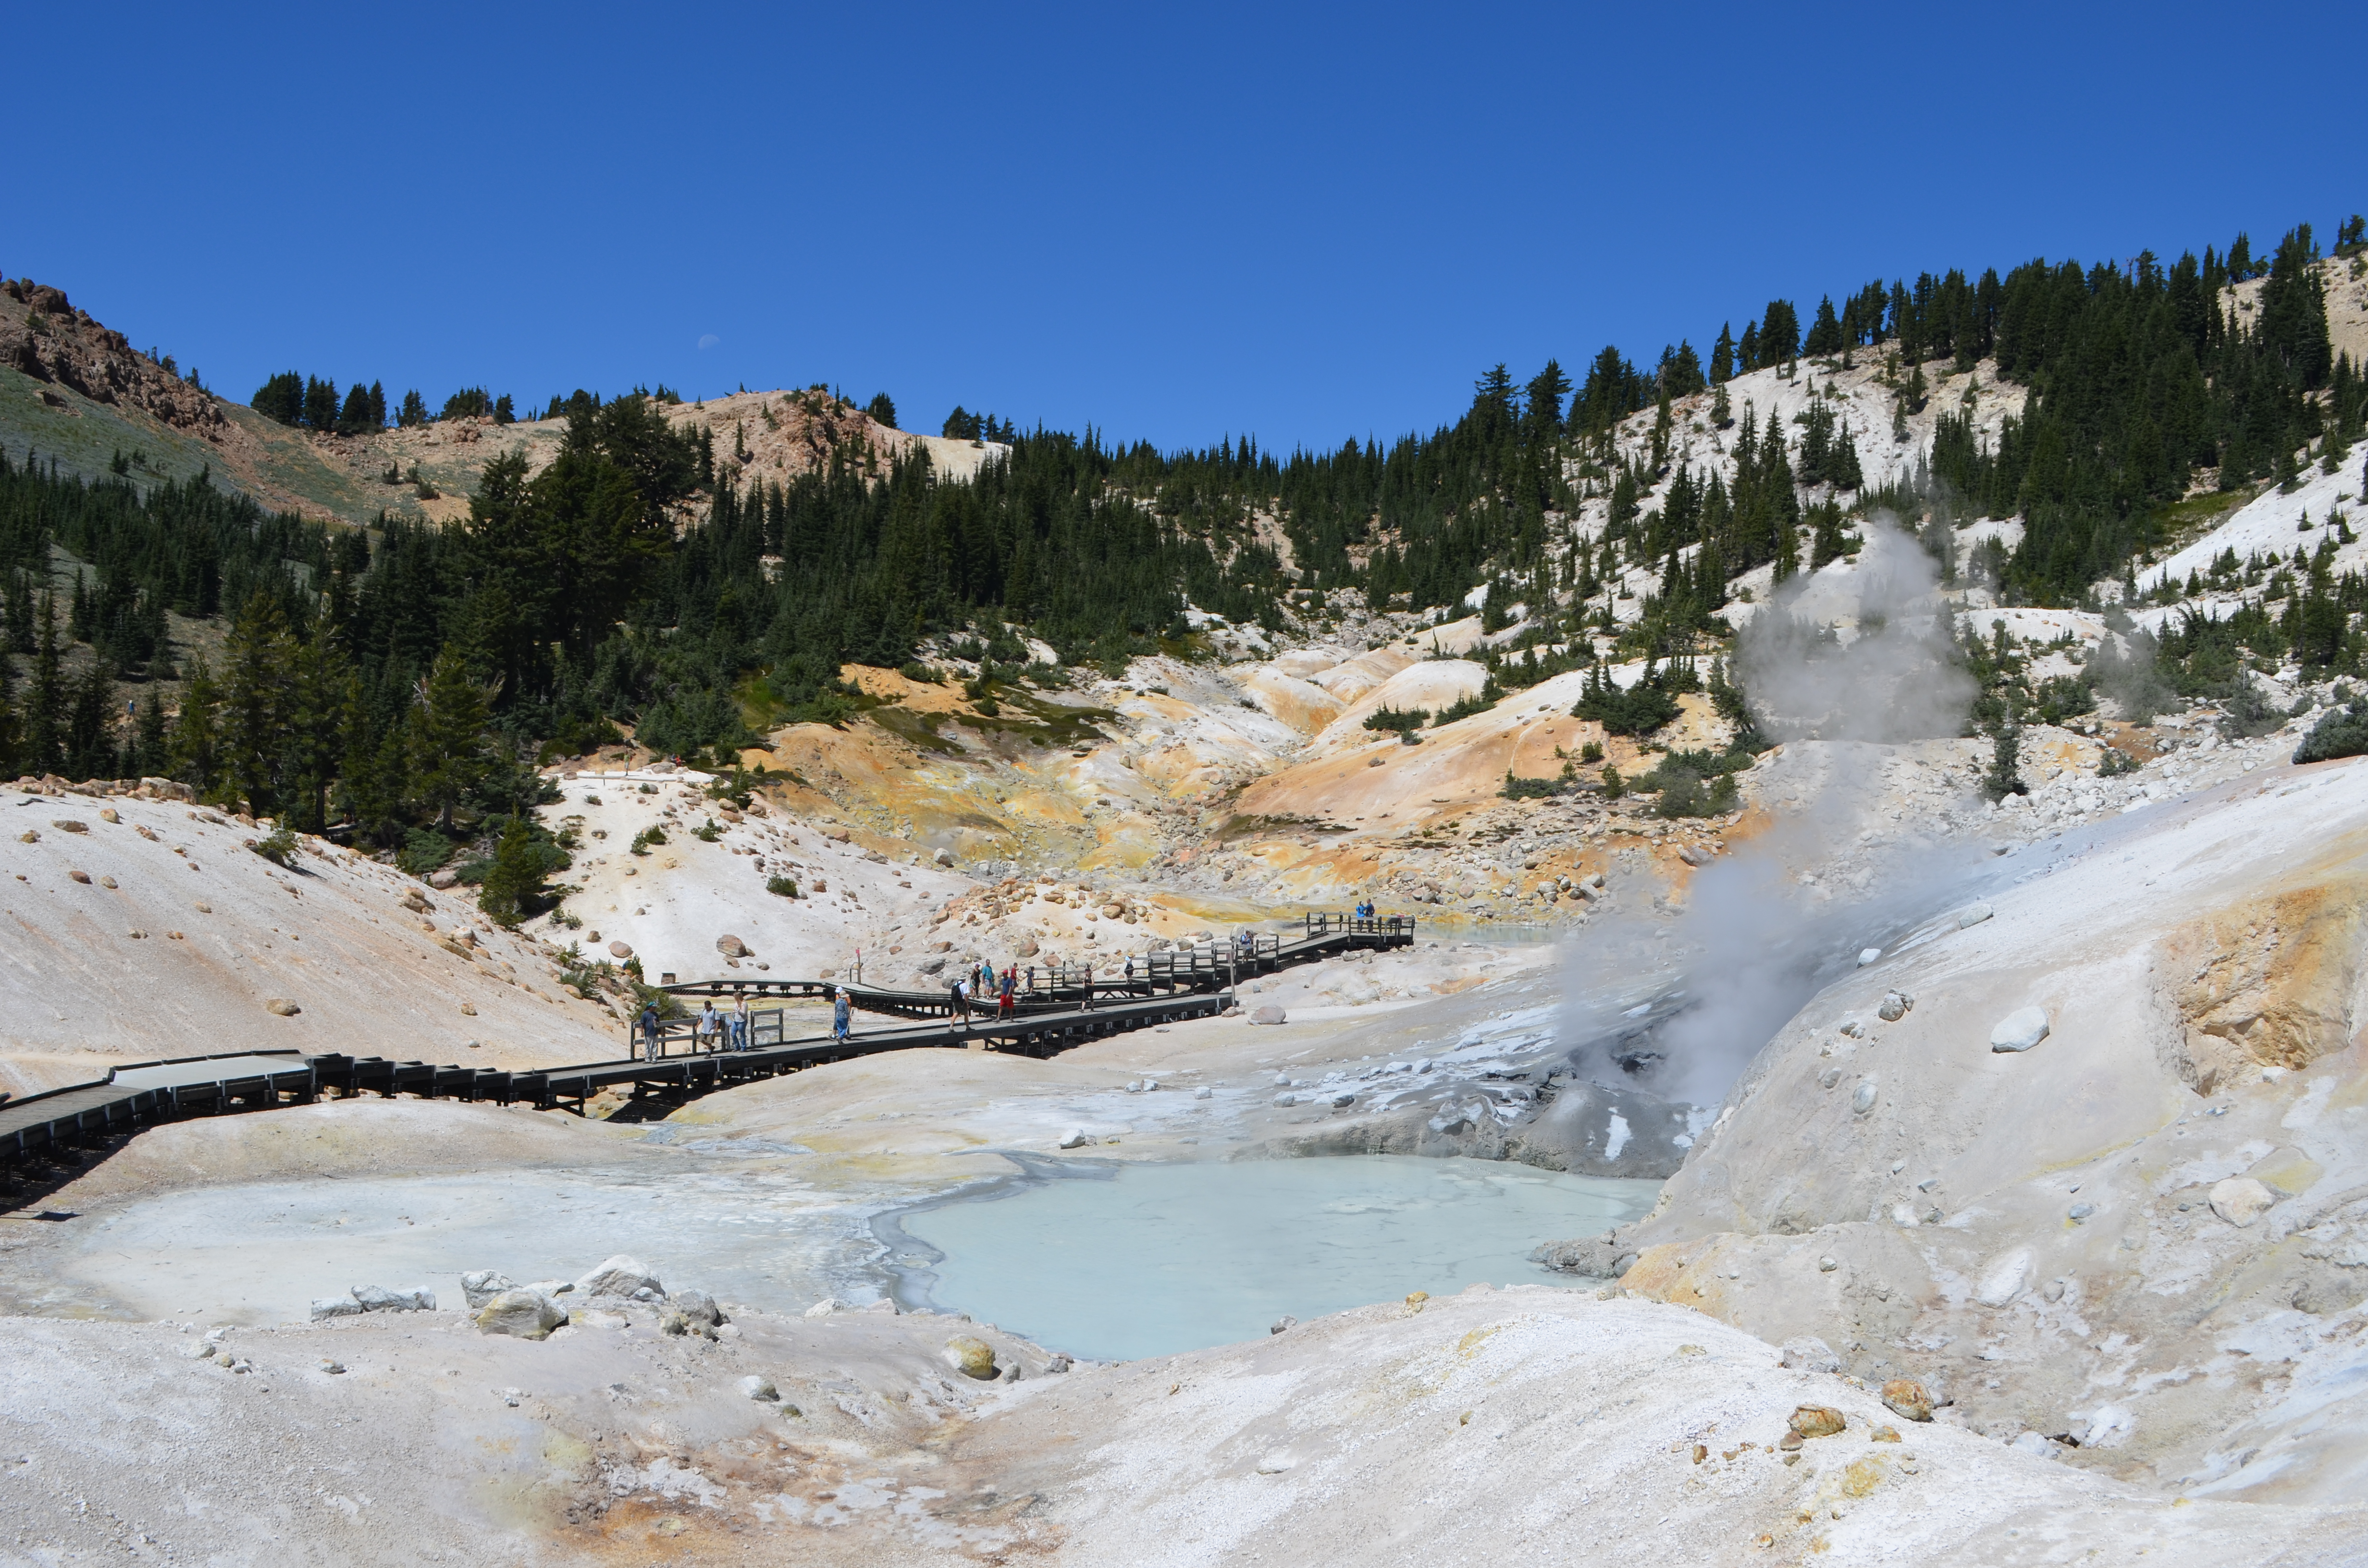 A boardwalk passes through a colorful, steaming hydrothermal basin.